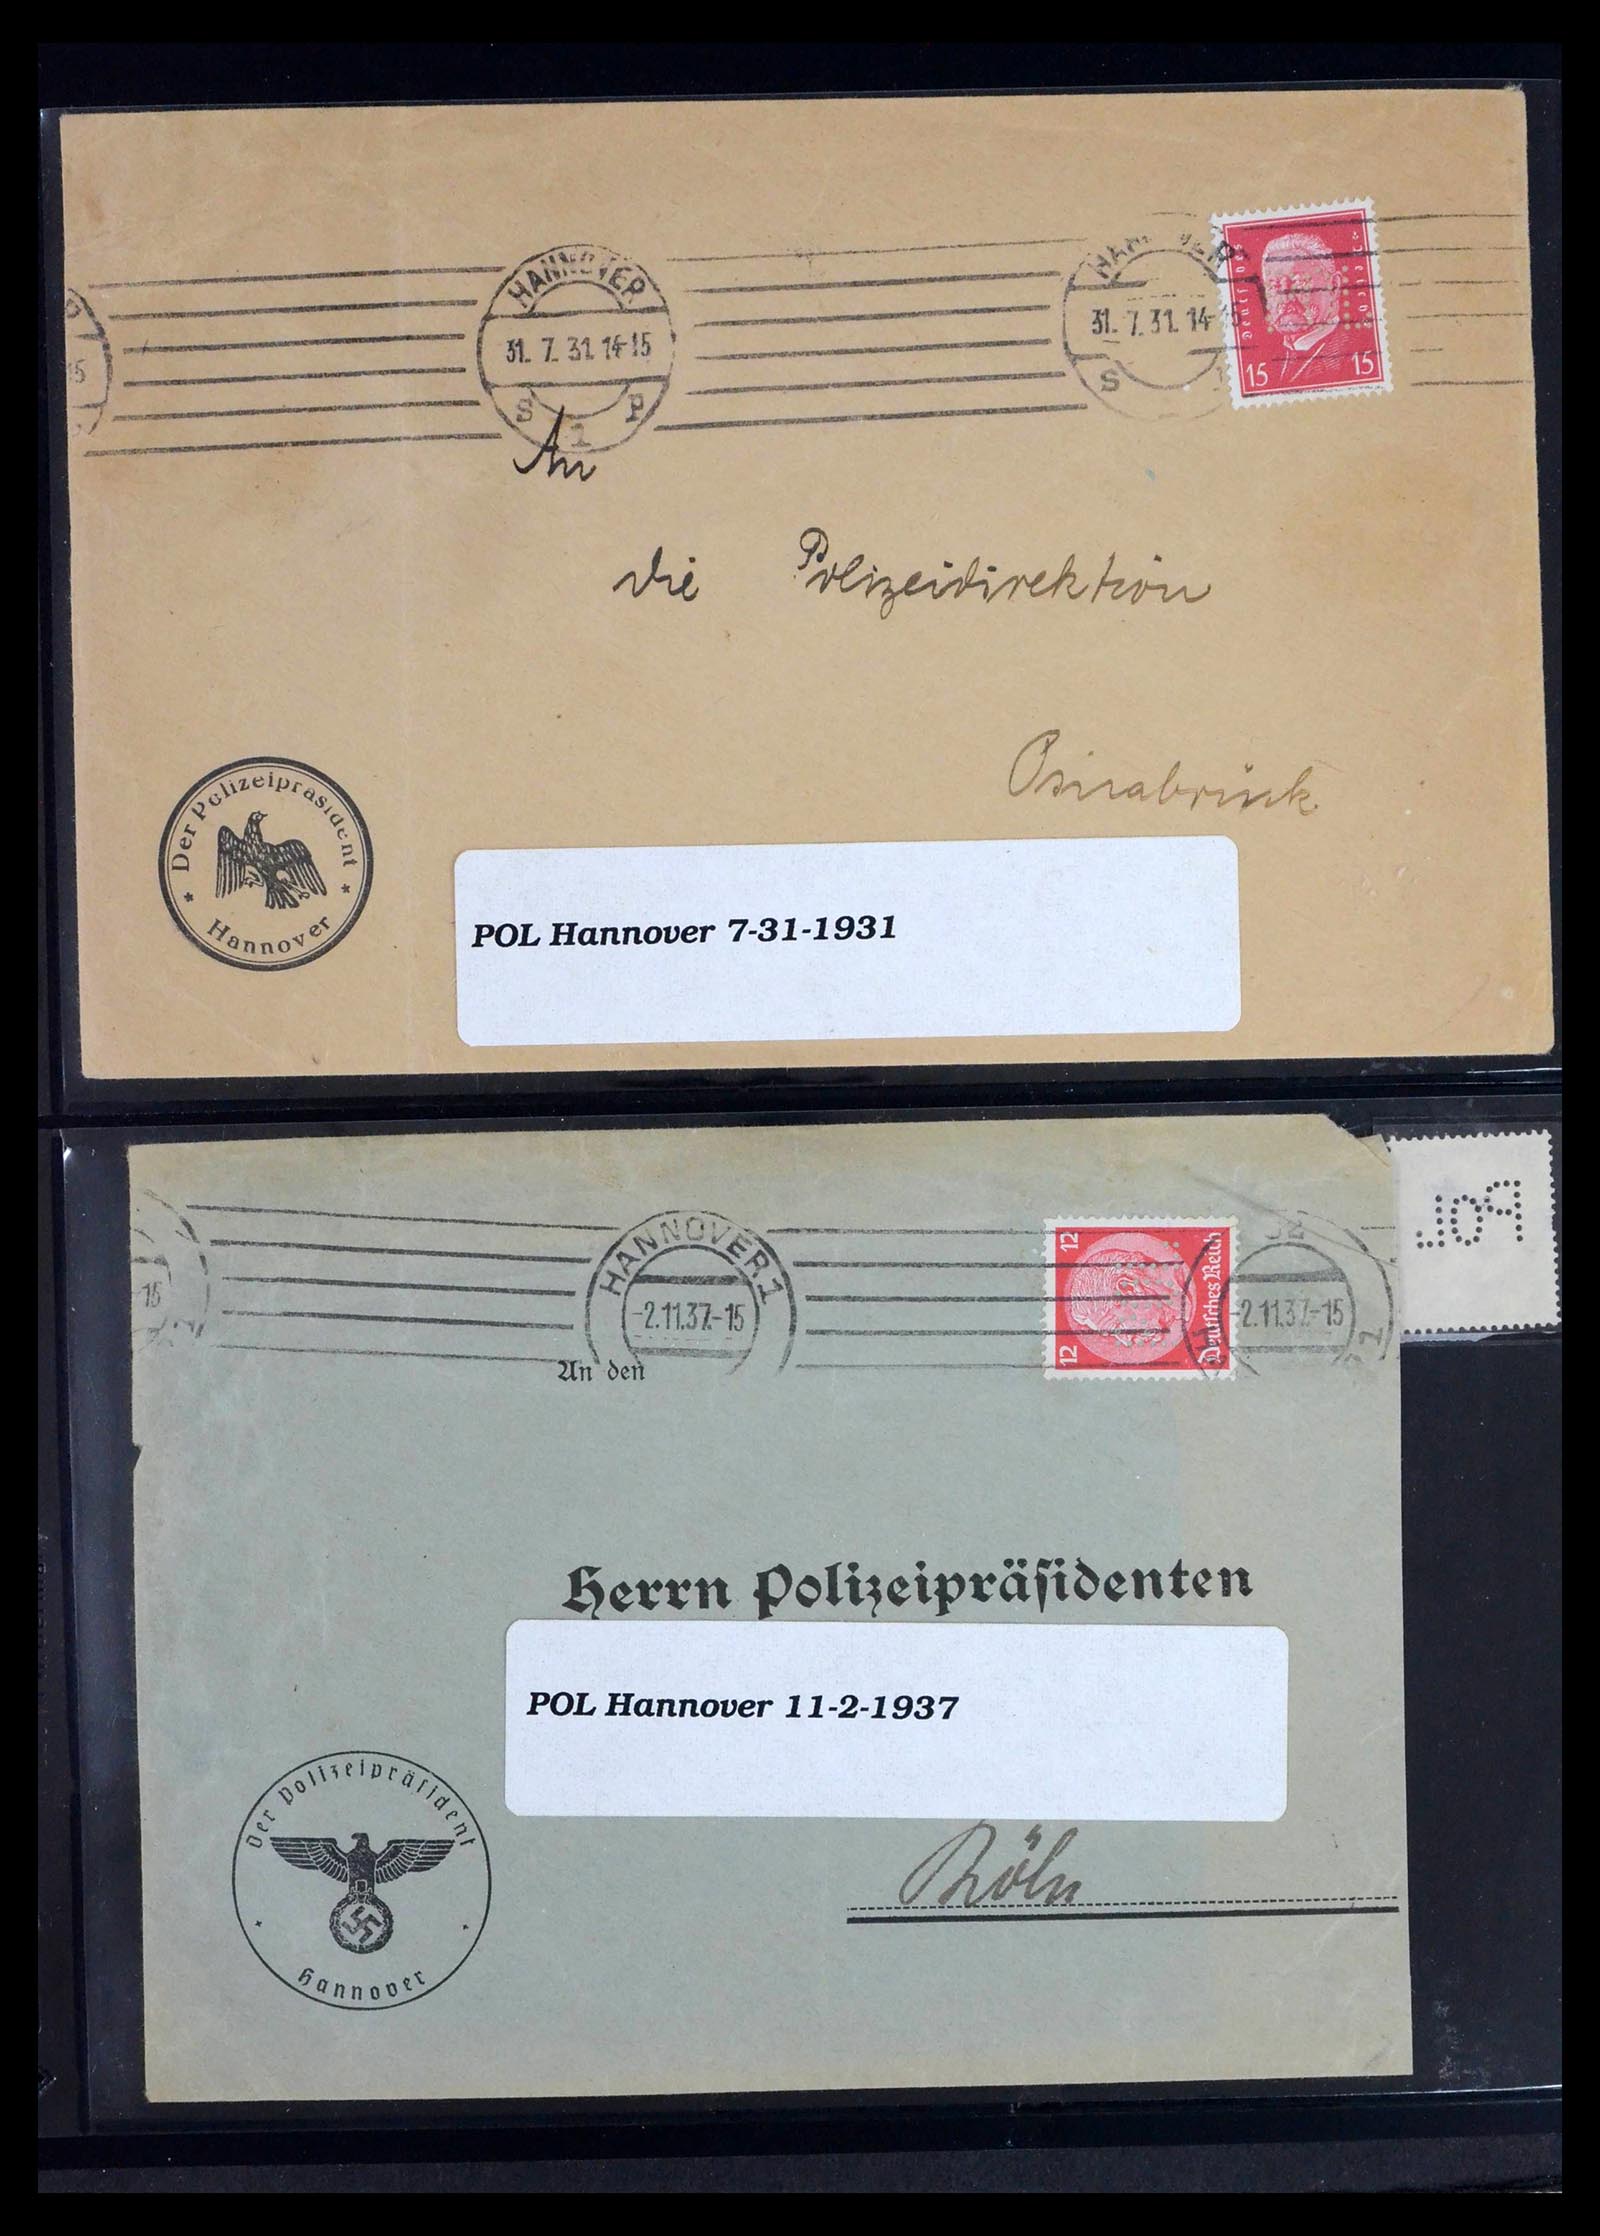 39458 0001 - Stamp collection 39458 Germany POL lochungen 1926-1955.